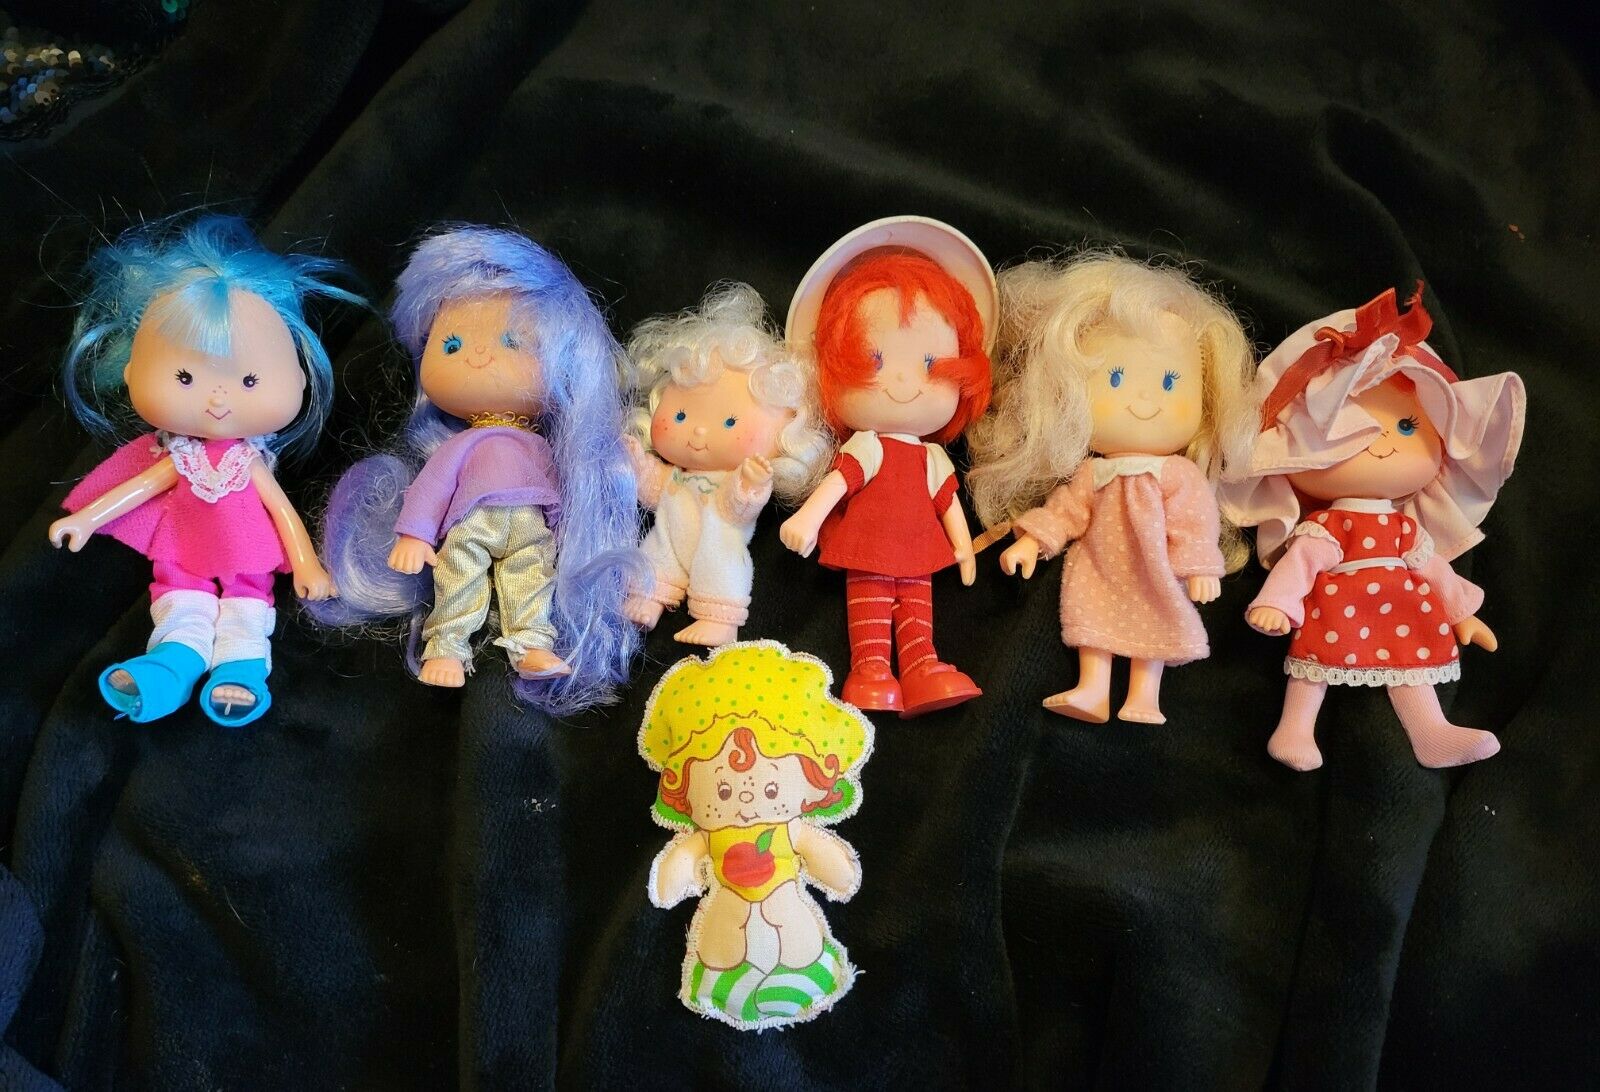 Vintage Strawberry Shortcake Doll Lot of 7 dolls 1980s late 70s